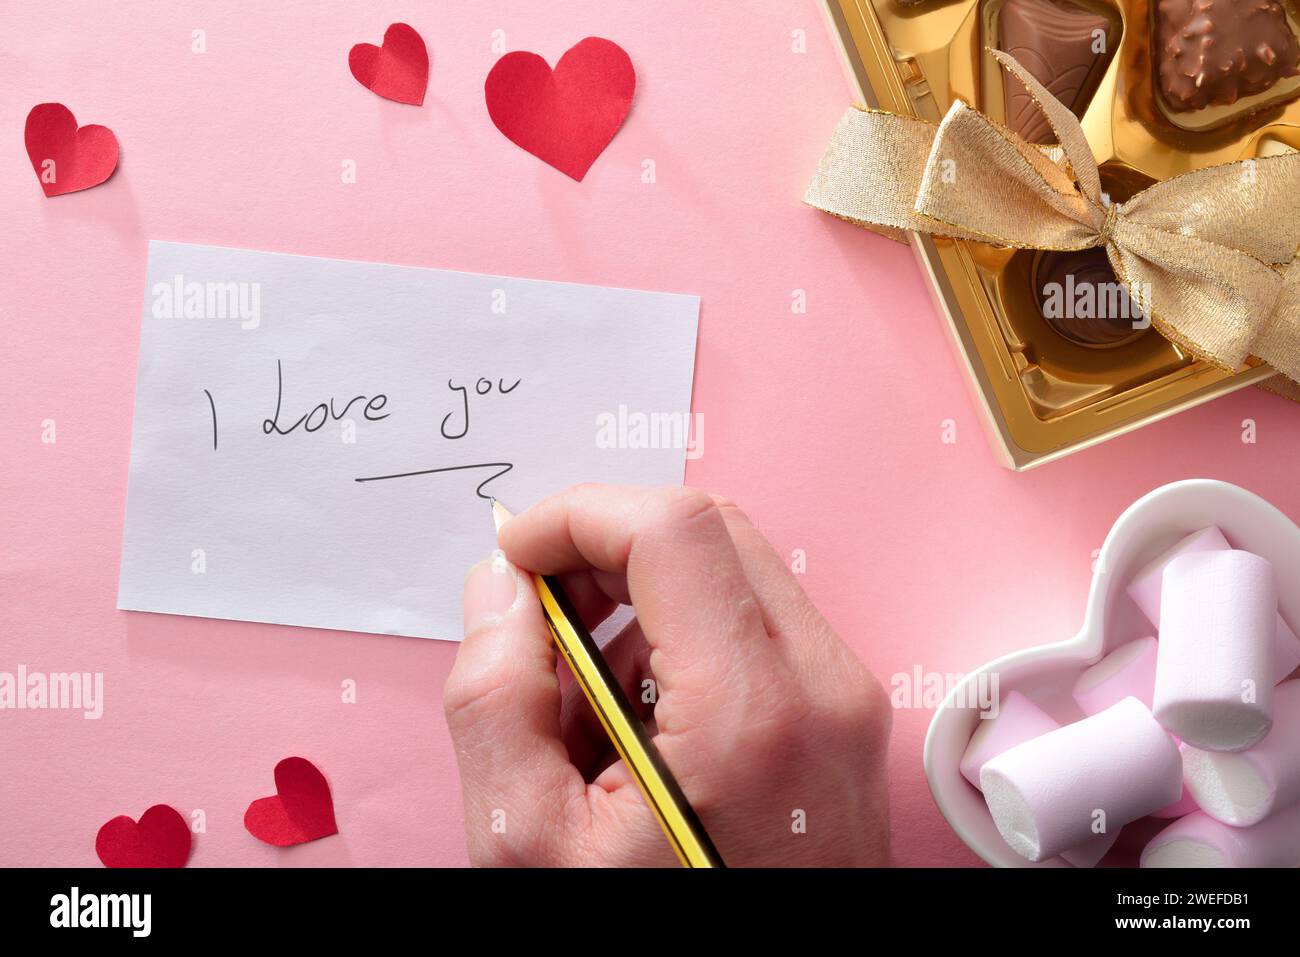 Hand writing I love you on white sheet on pink background with box of chocolates and container with sweets. Top view. Stock Photo